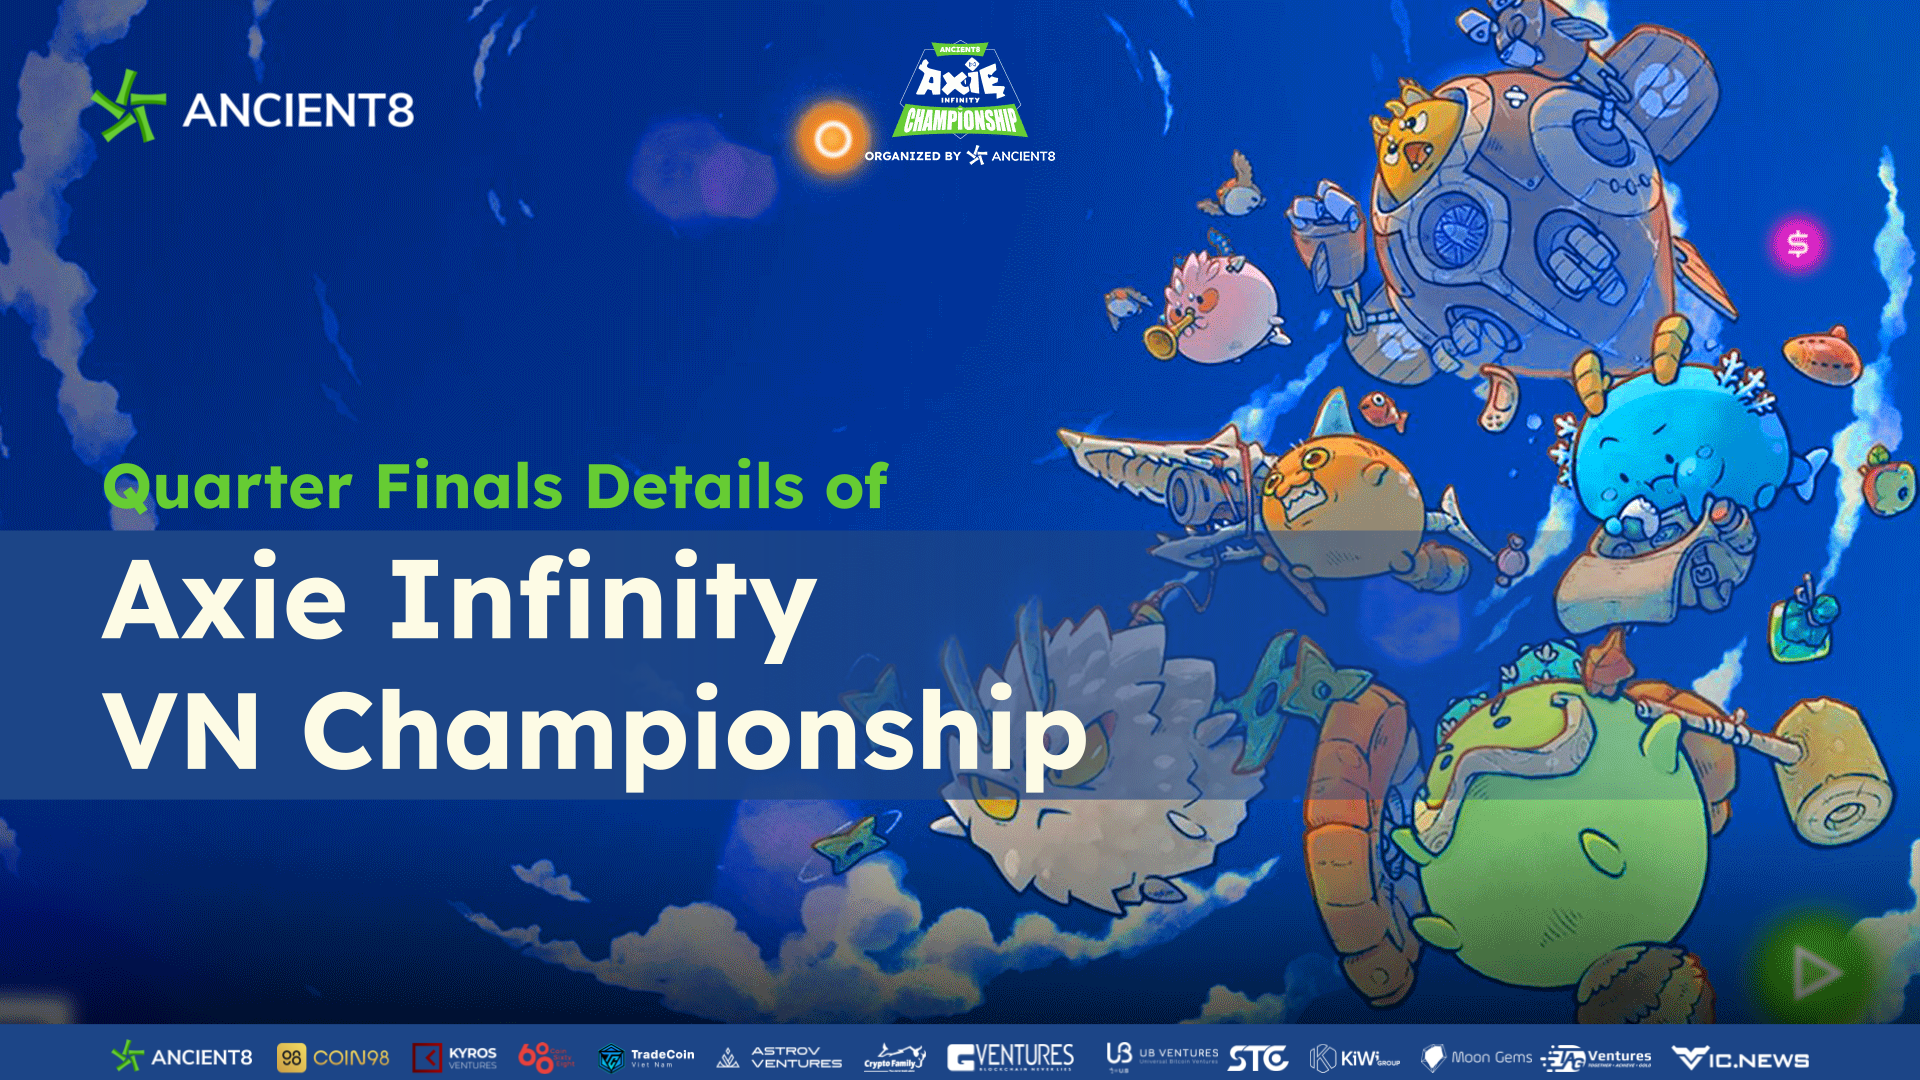 Quarter Finals details of Axie Infinity VN Championship